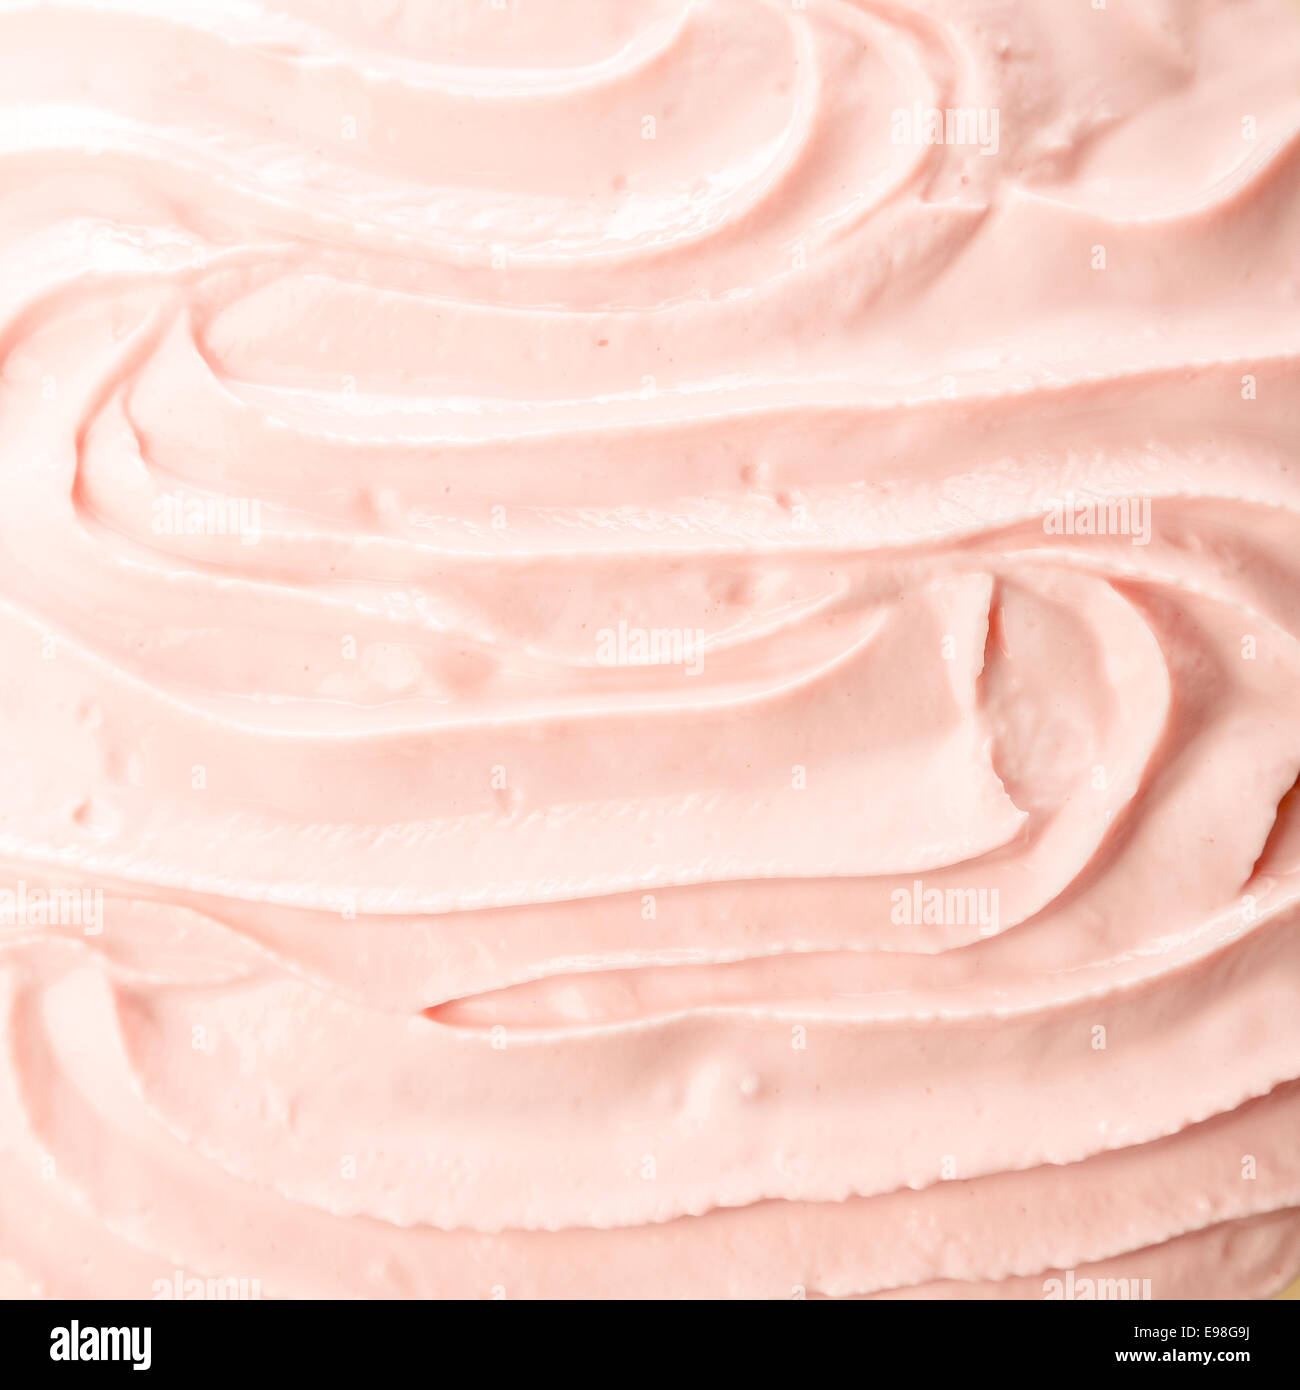 Tasty cold pink berry frozen yoghurt or ice cream background with a smooth creamy texture for a delicious refreshing summer dessert Stock Photo